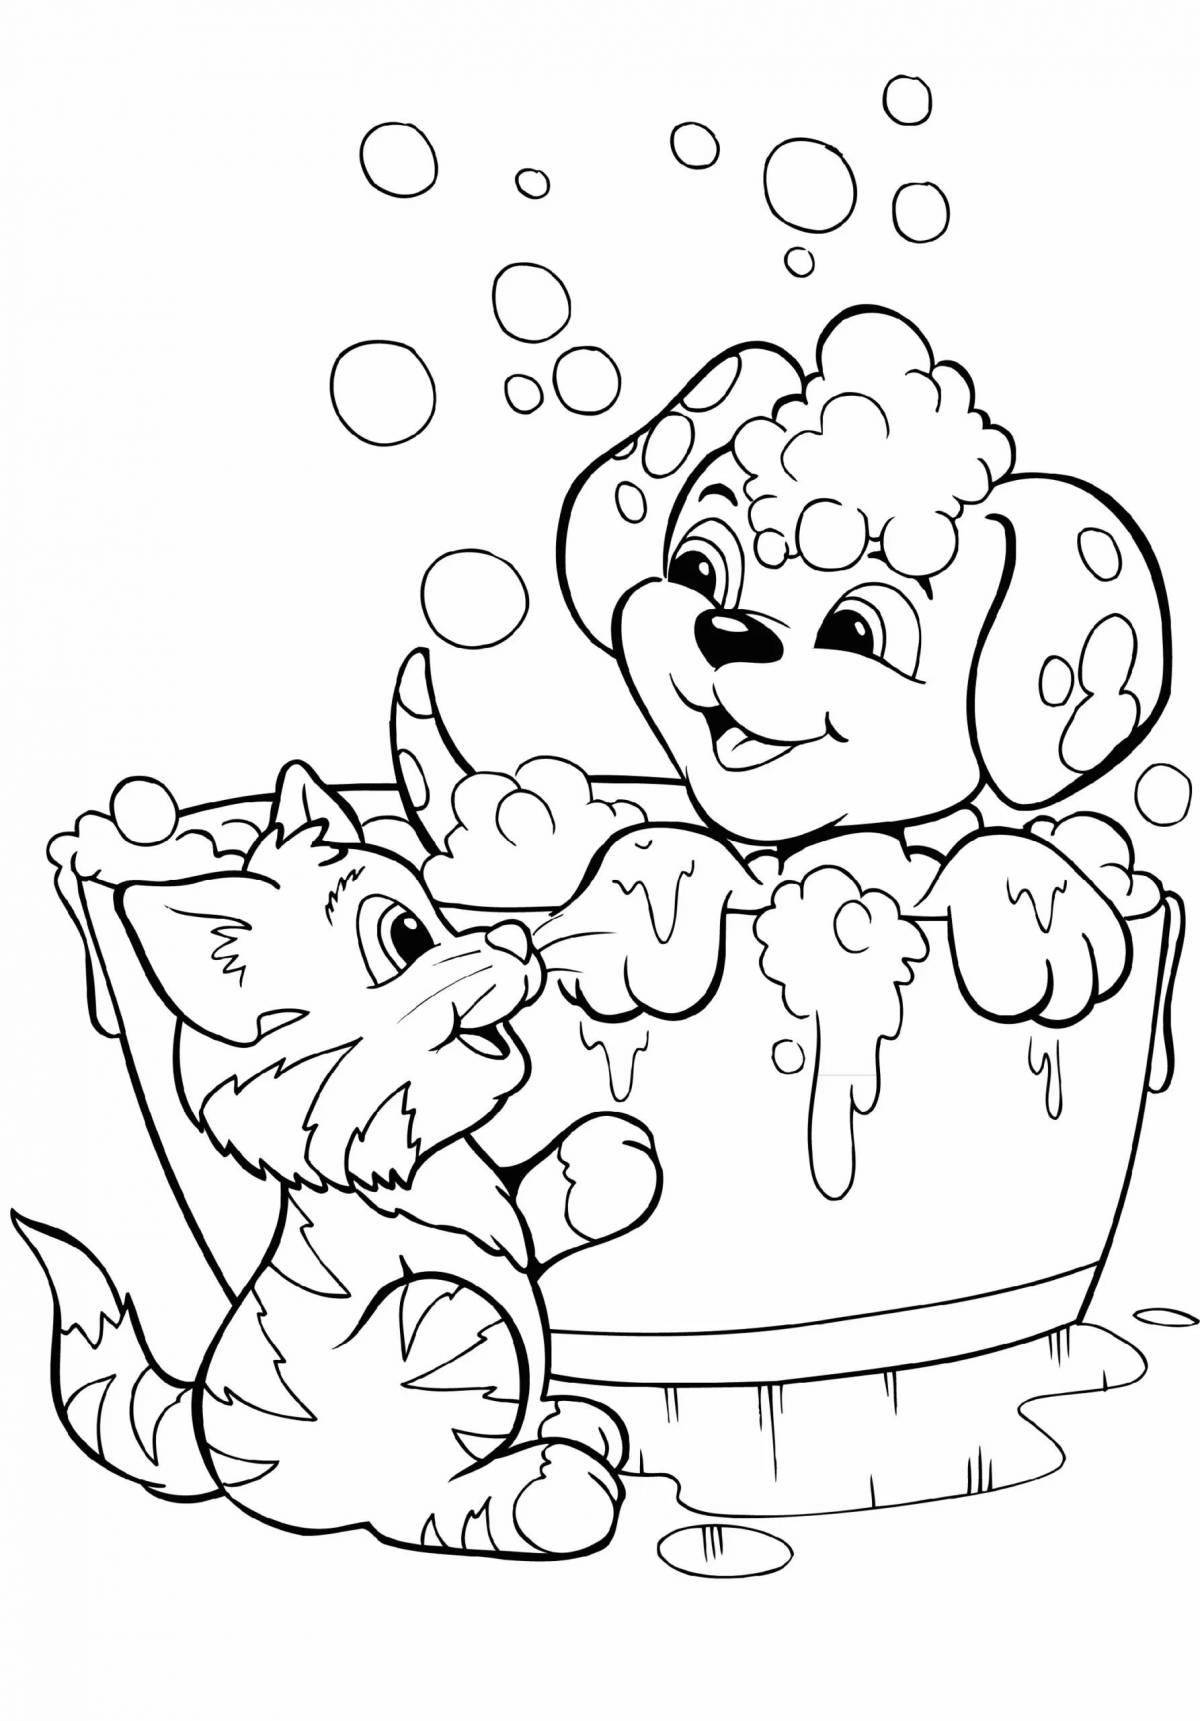 Naughty cat and puppy coloring page